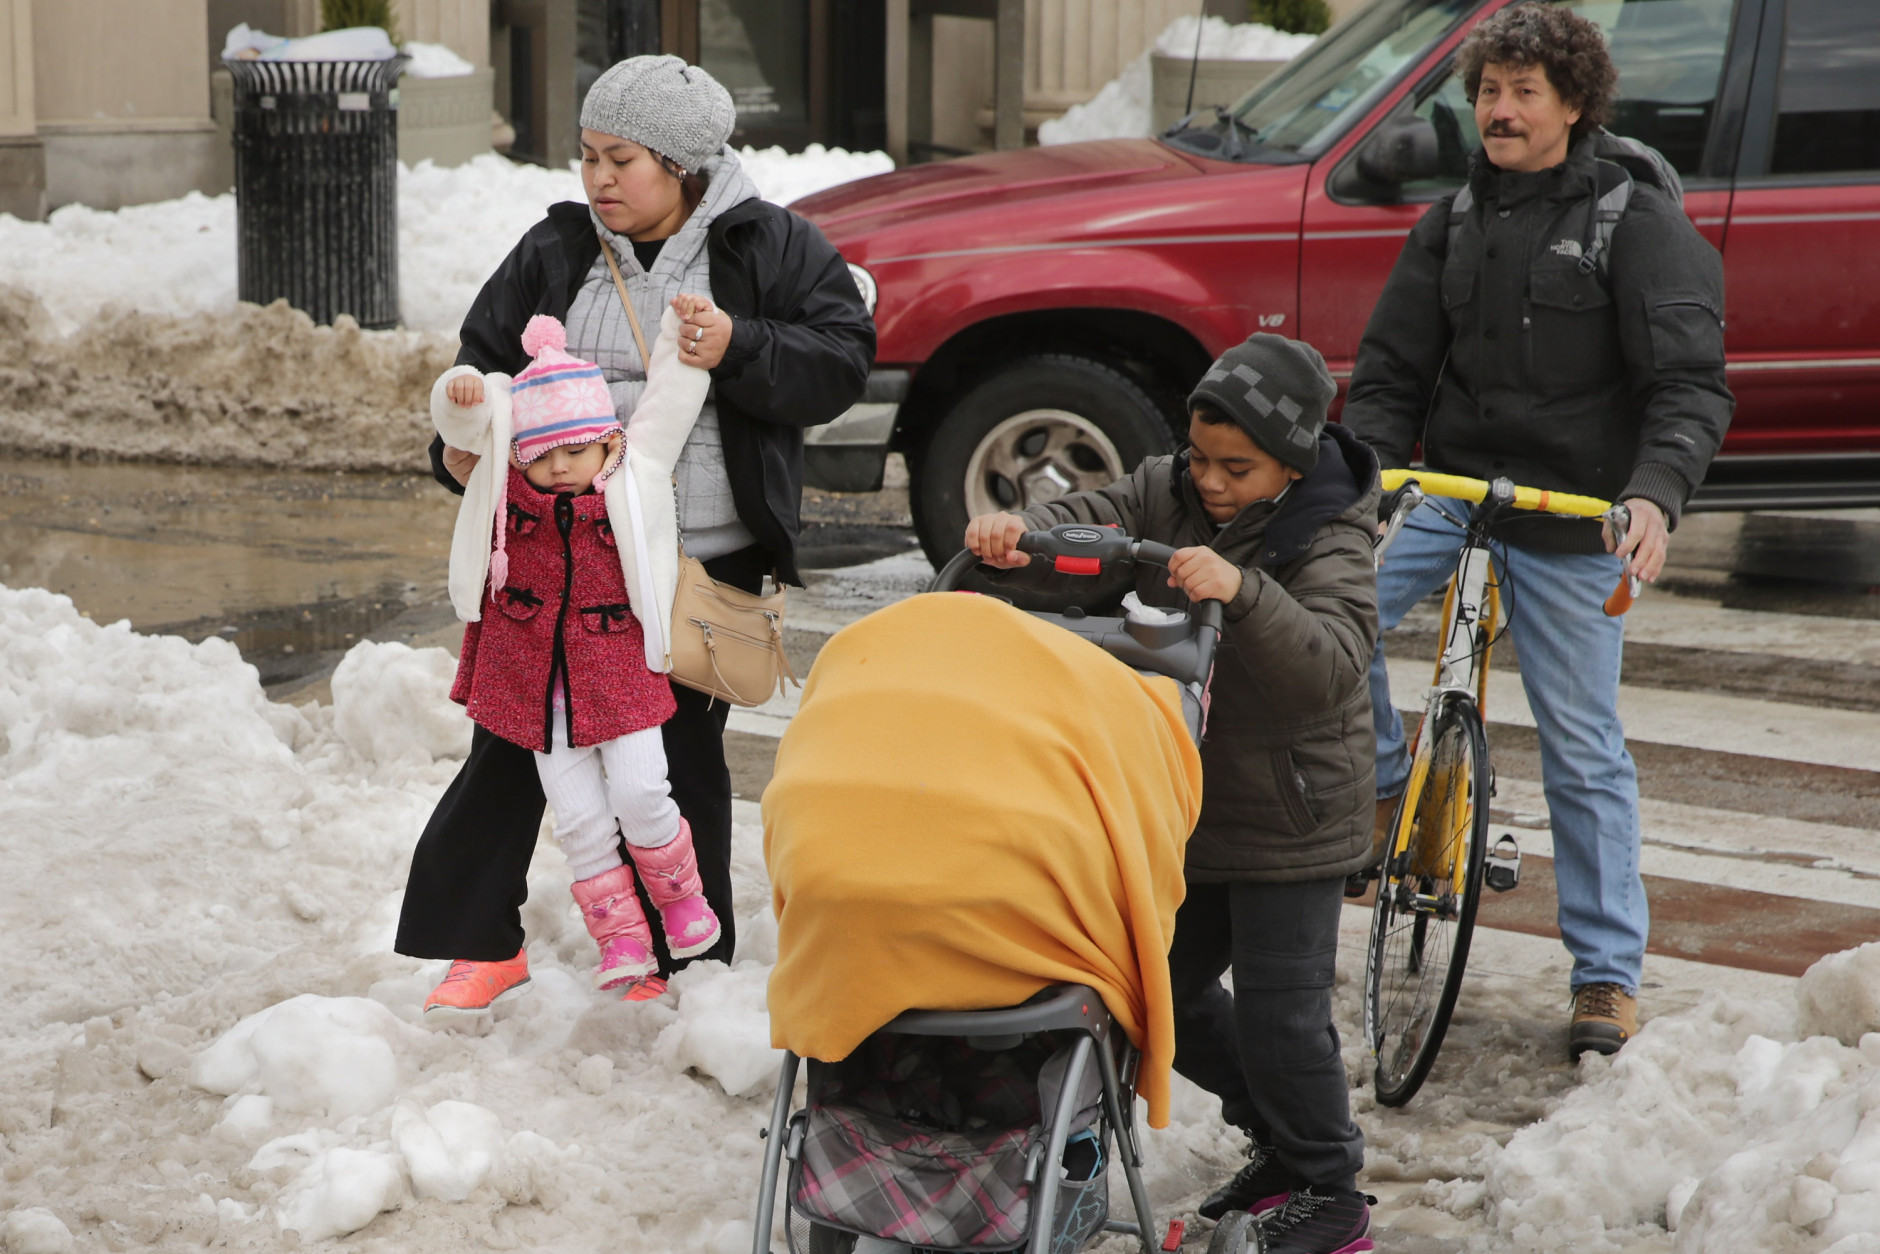 WASHINGTON, DC - JANUARY 26:  Adults and children traverse piles of snow and slush puddles in a busy shopping area in the Columbia Heights neighborhood following the weekend blizzard January 26, 2016 in Washington, DC. The east coast is still digging out from Winter Storm Jonas that hit the East Coast over the weekend, breaking snowfall records, causing 29 storm-related deaths, and serious flooding in coastal areas.  (Photo by Chip Somodevilla/Getty Images)